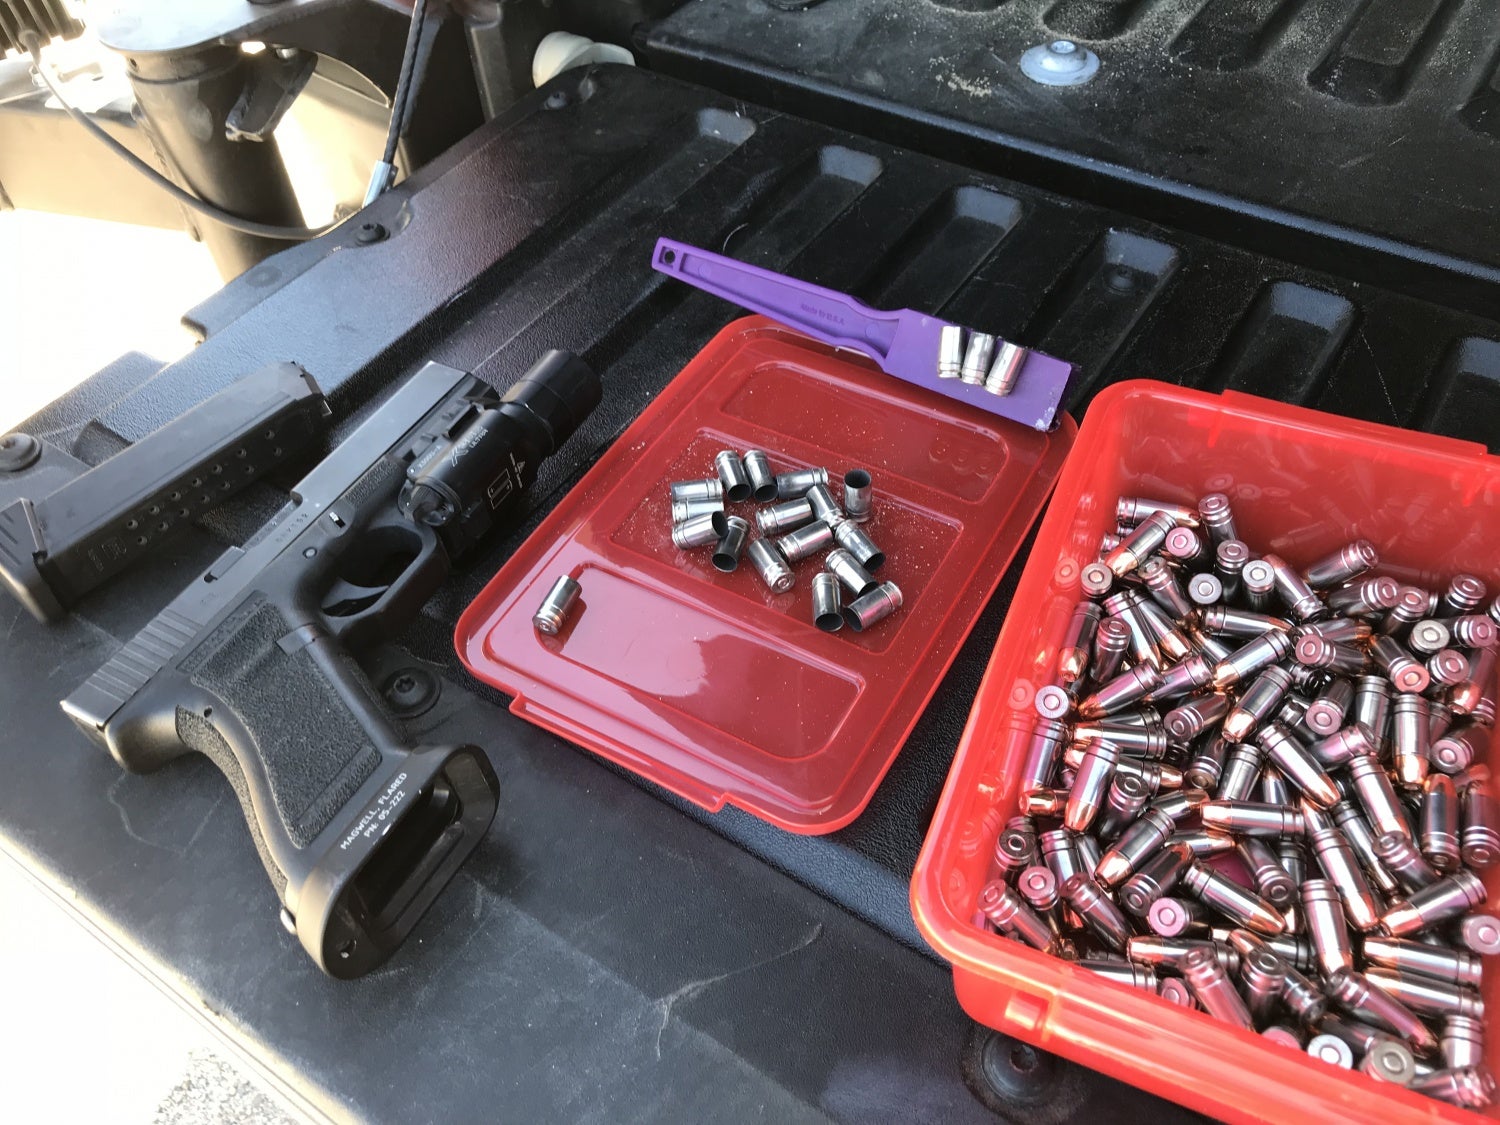 Spent NAS3 casings next to freshly loaded rounds. Note the purple magnet; these are very easy to pick up at the range.